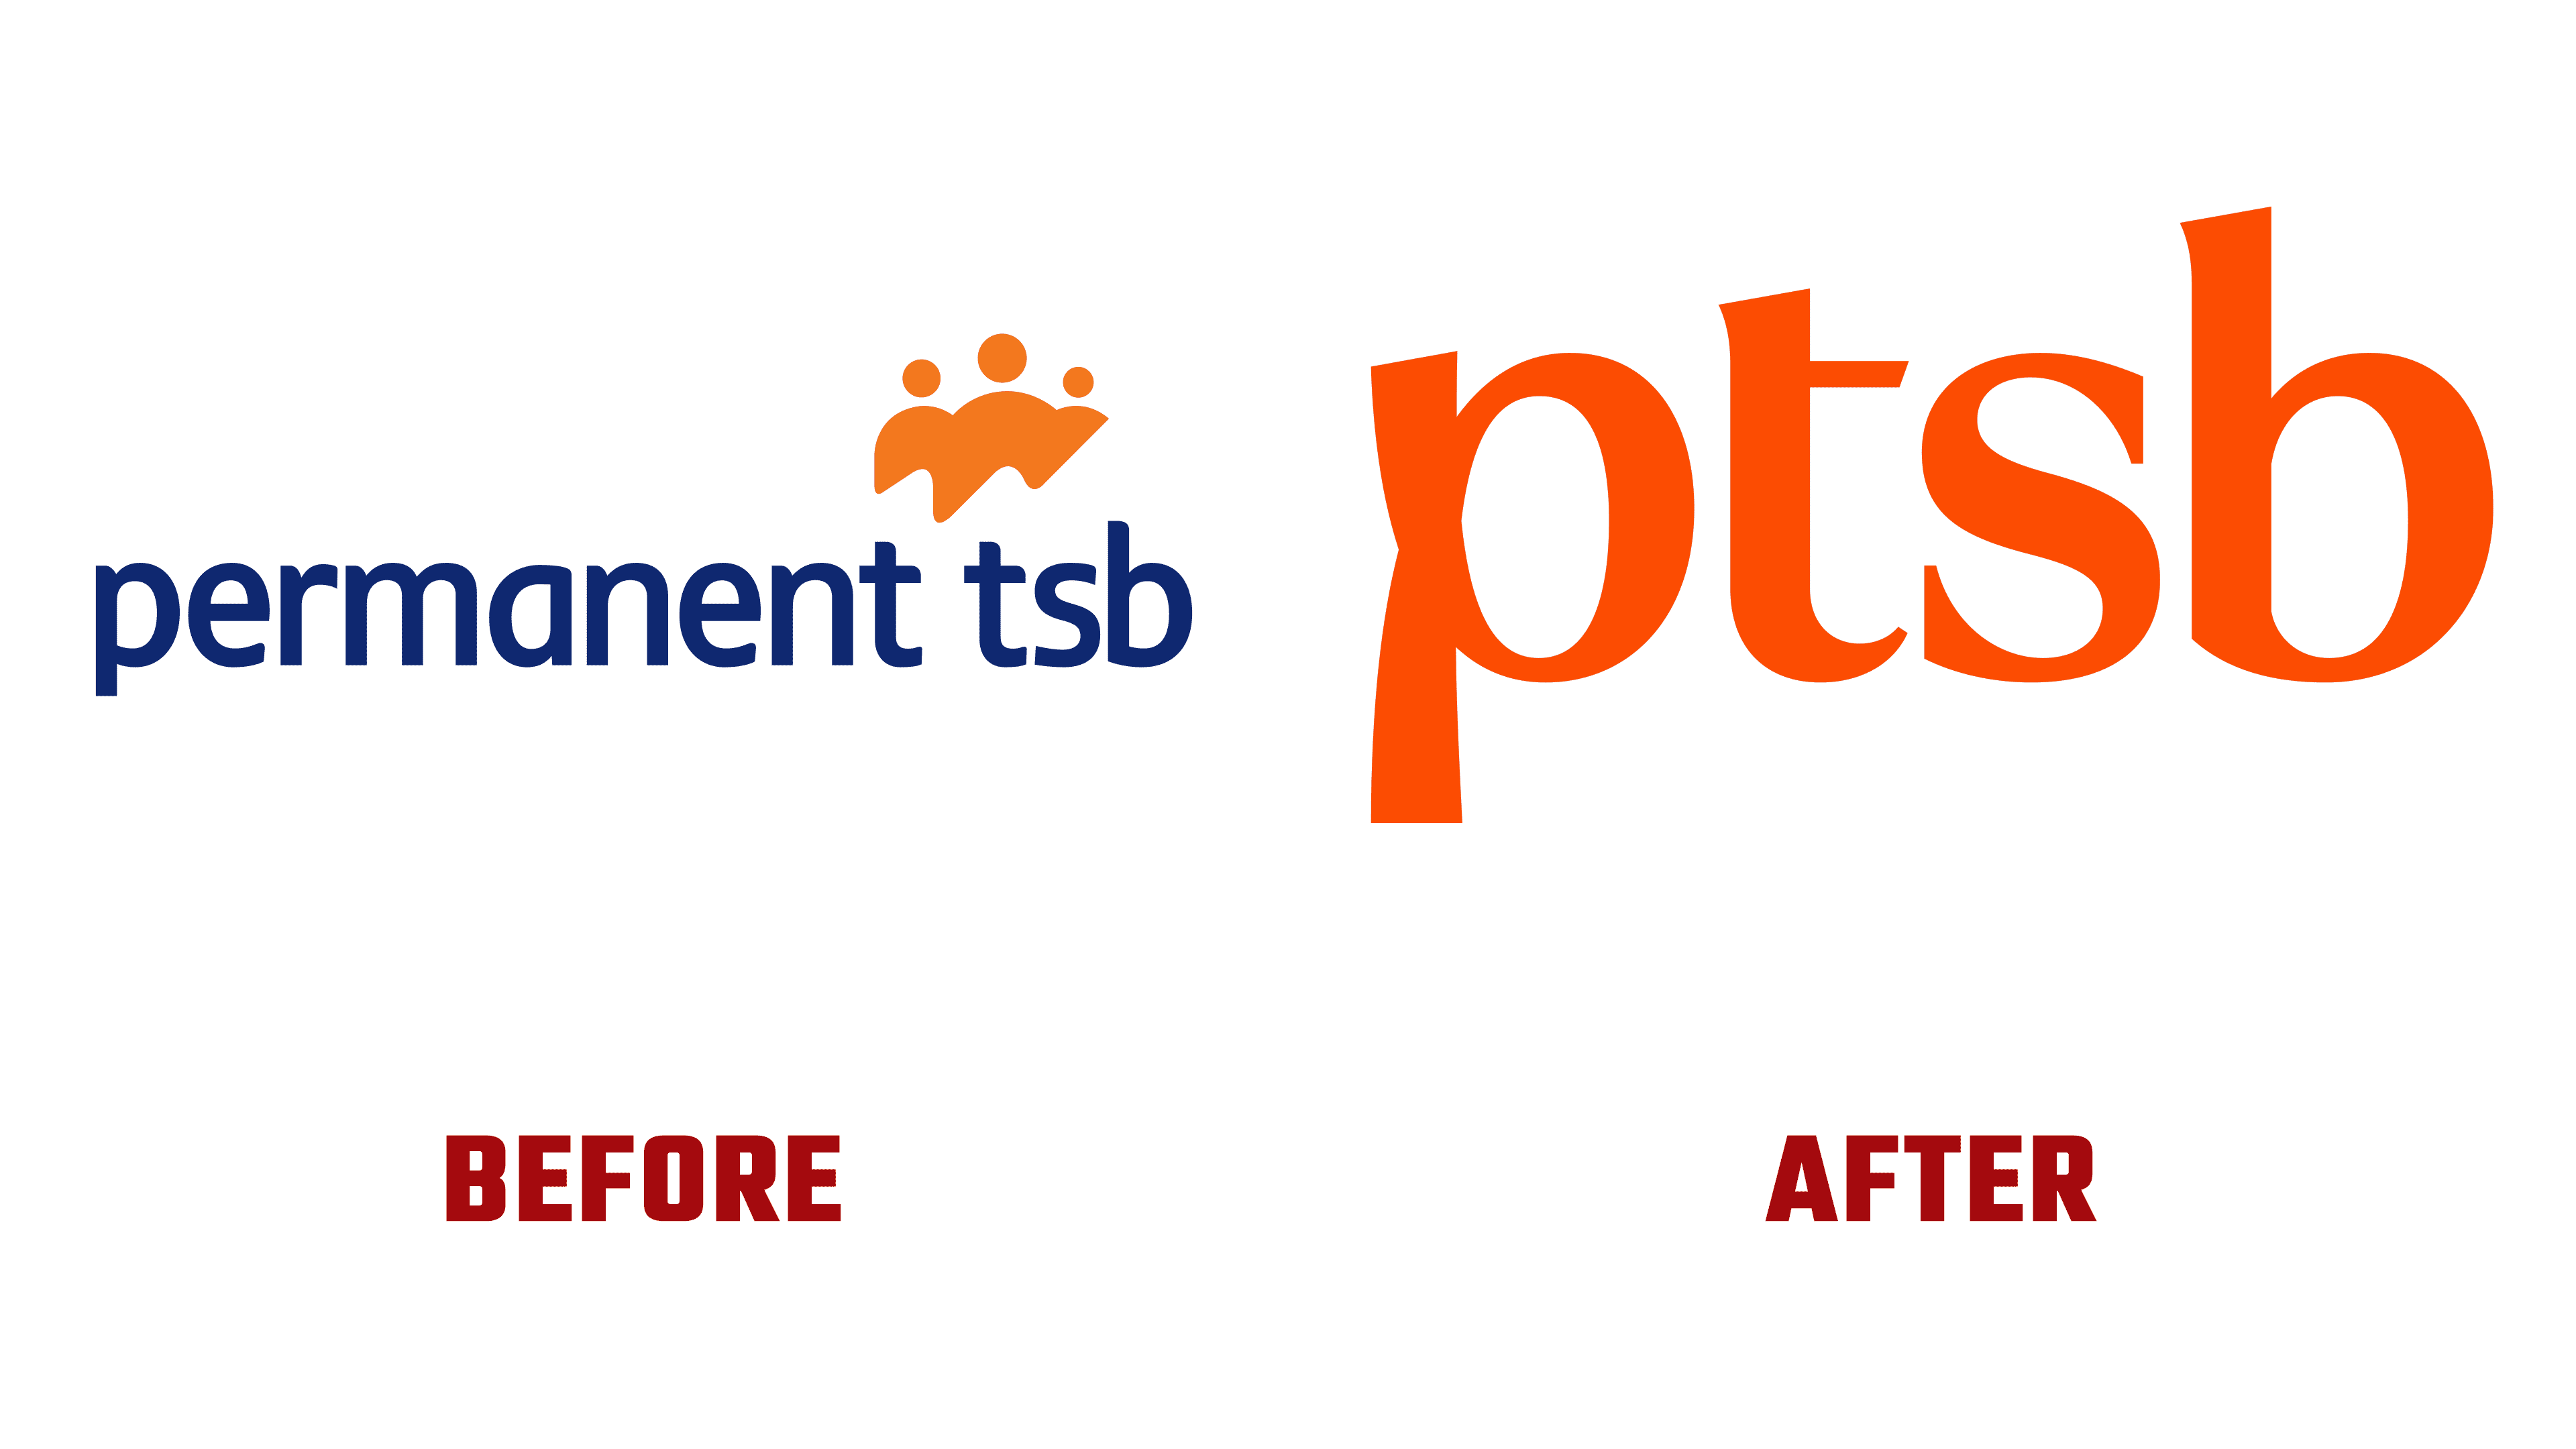 Ptsb Unveils New Corporate Identity Amid Mixed Reviews